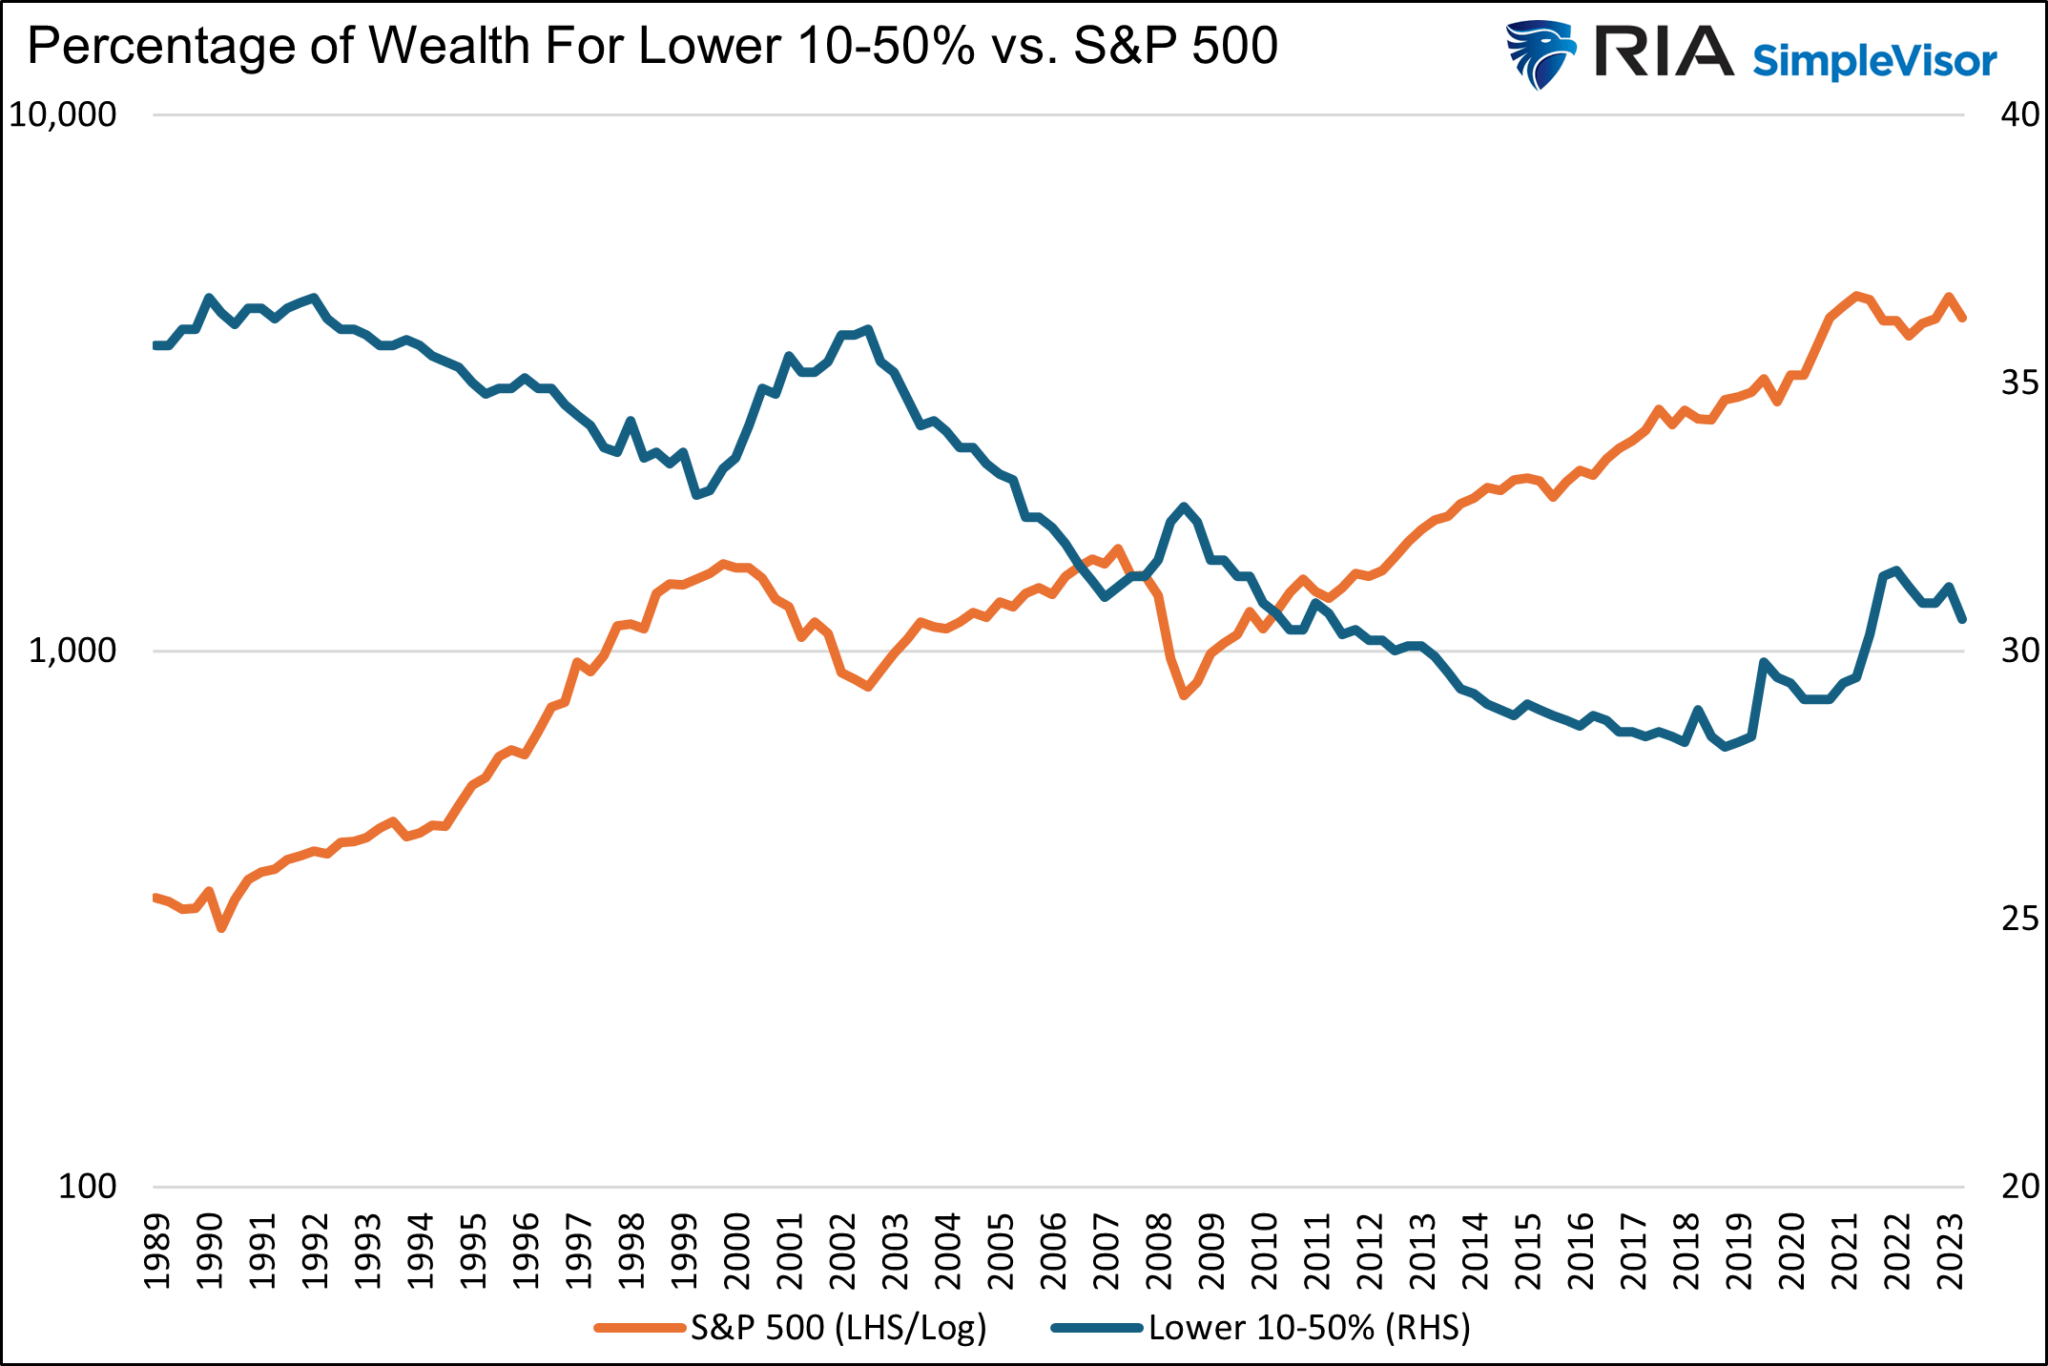 Change In Wealth For Lower 10-50% Vs S&P 500